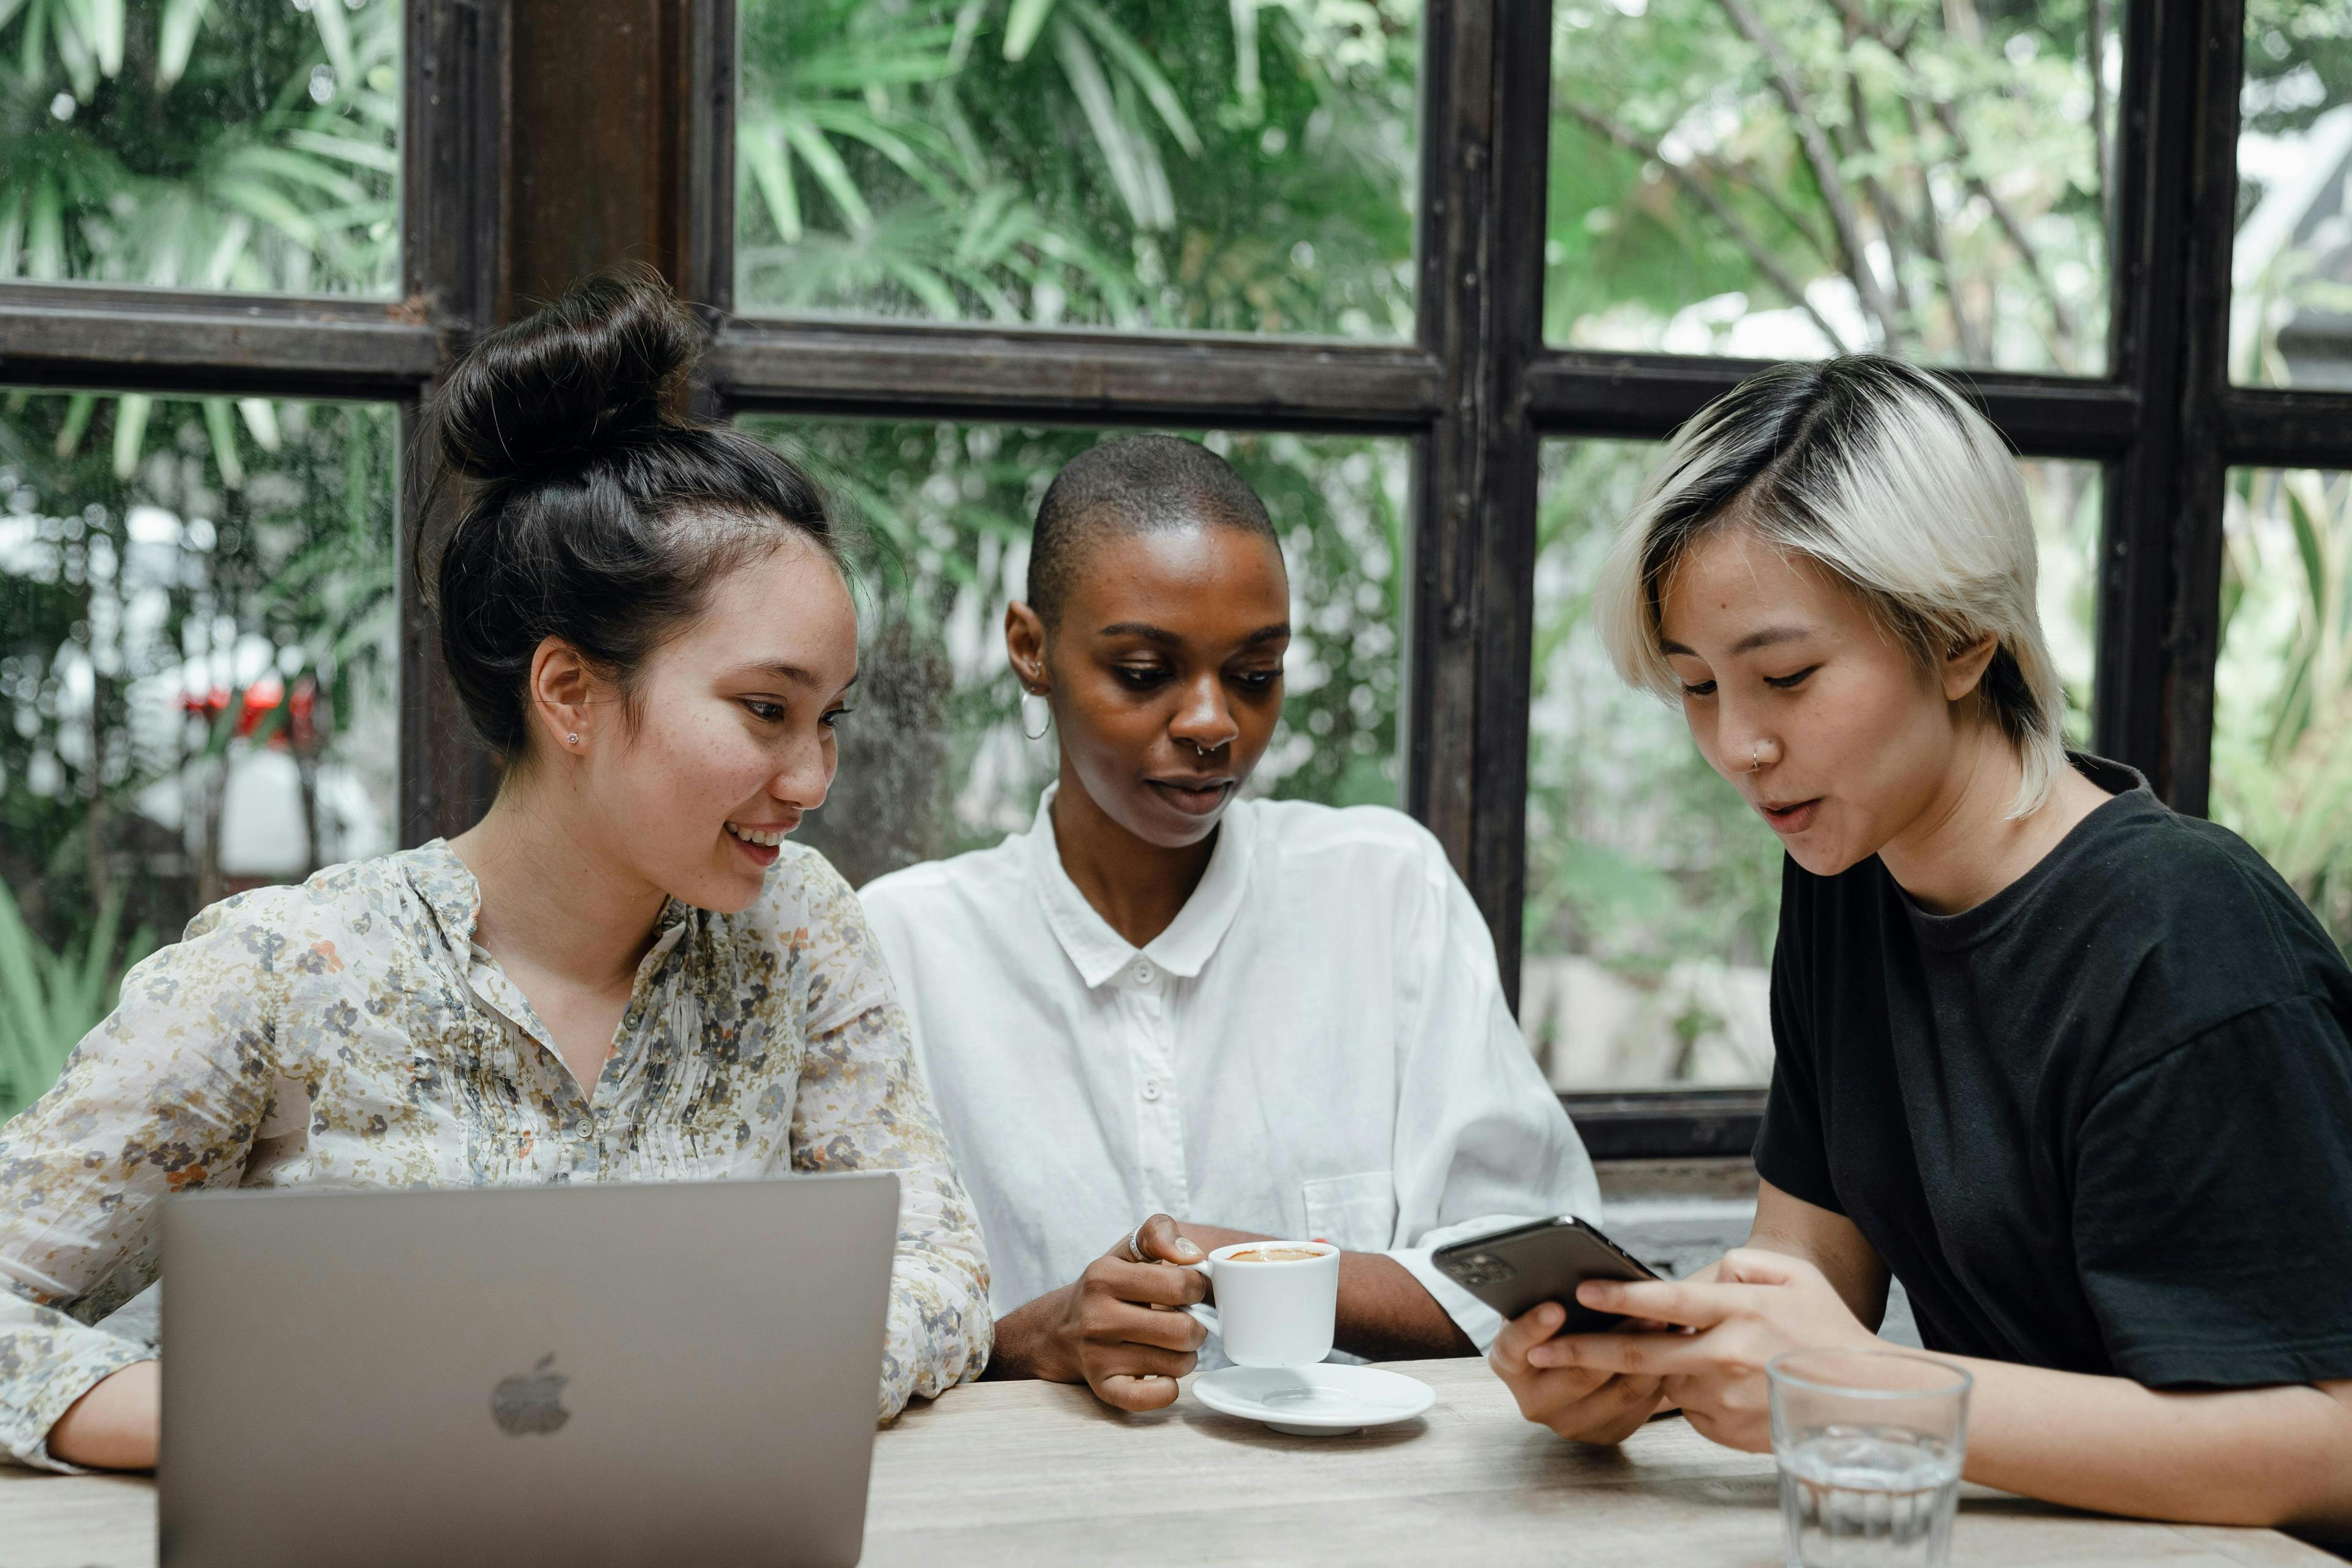 Three diverse women are seated at a table, engaging in a collaborative discussion. One has a laptop open, another holds a coffee cup, and the third is showing something on her phone. The setting is bright with a natural backdrop, ideal for illustrating the concept of "influencer marketing platforms."